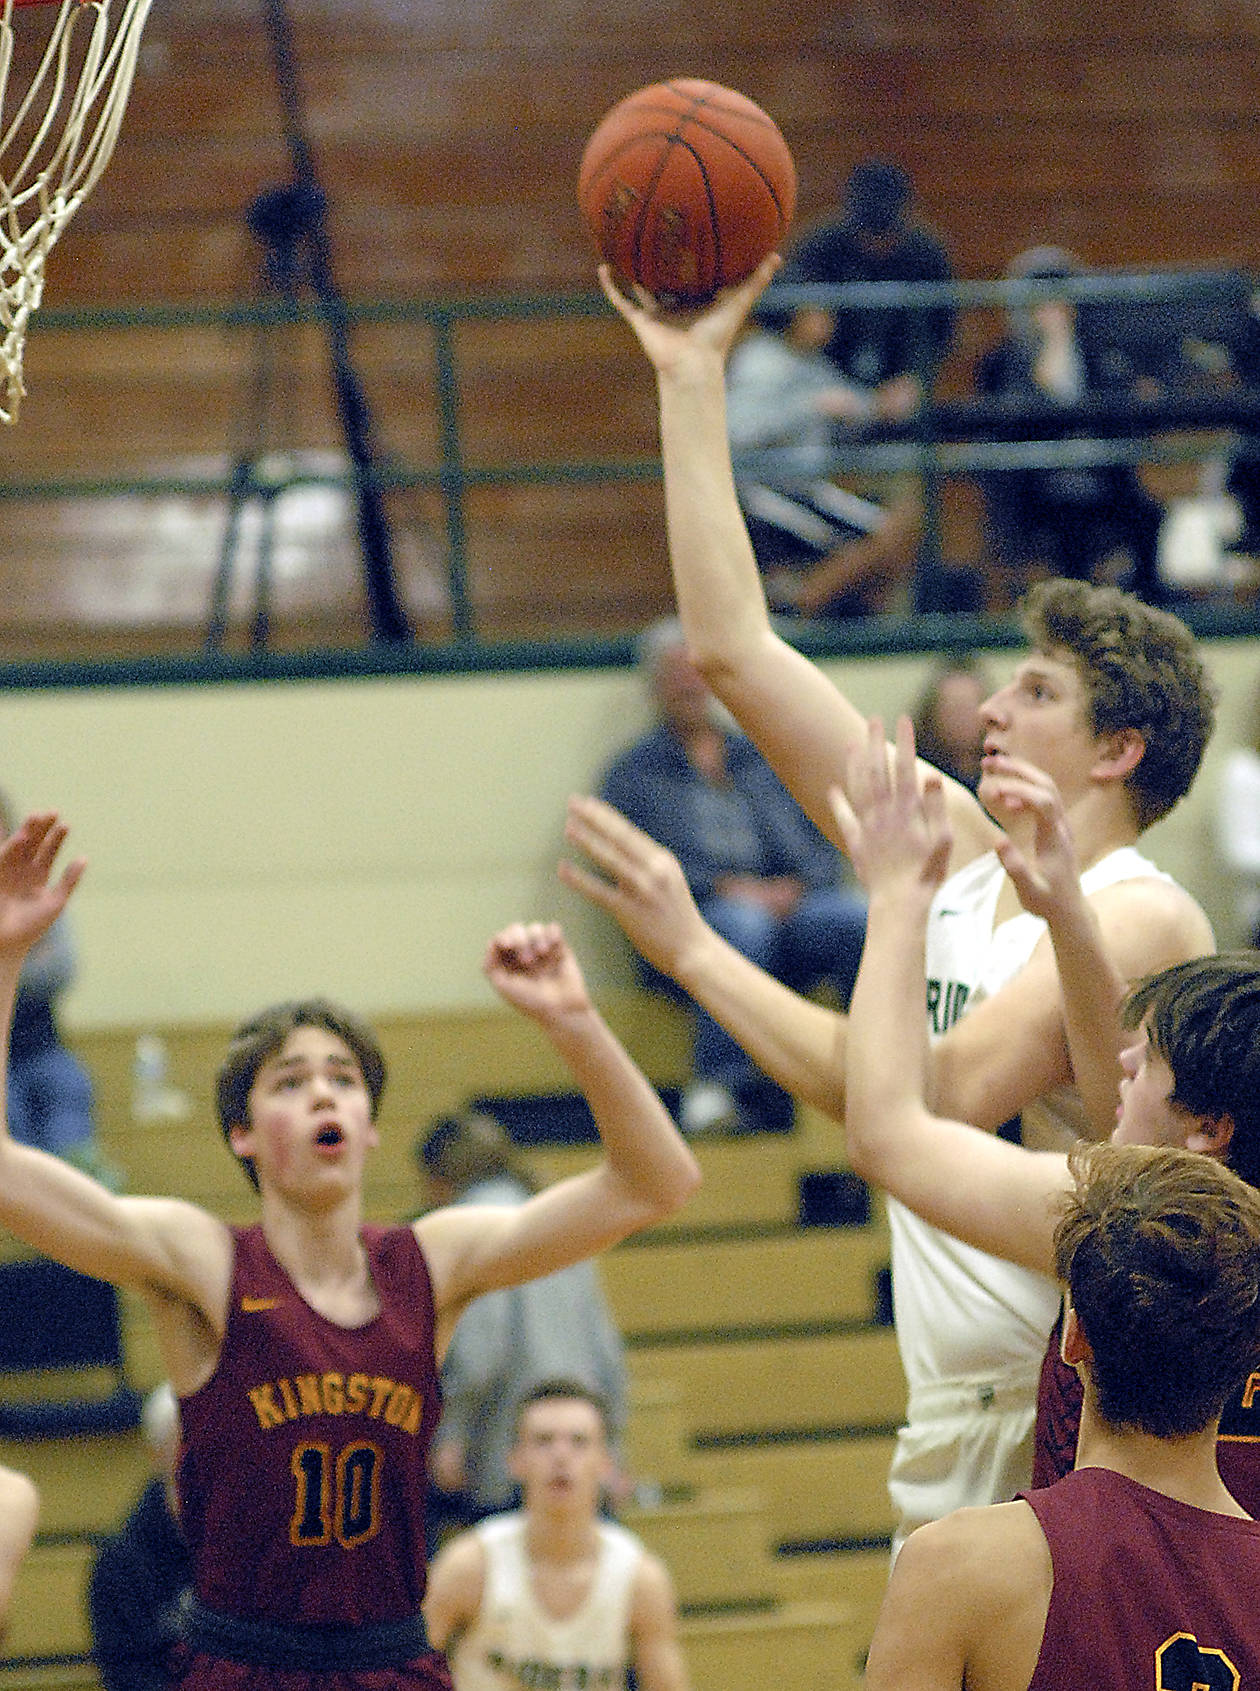 High school boys basketball games will feature a 30-second shot clock beginning next season. The move, part of a number of rules changes adopted by the WIAA, standardizes the shot clock for boys and girls basketball. (Keith Thorpe/Peninsula Daily News file)